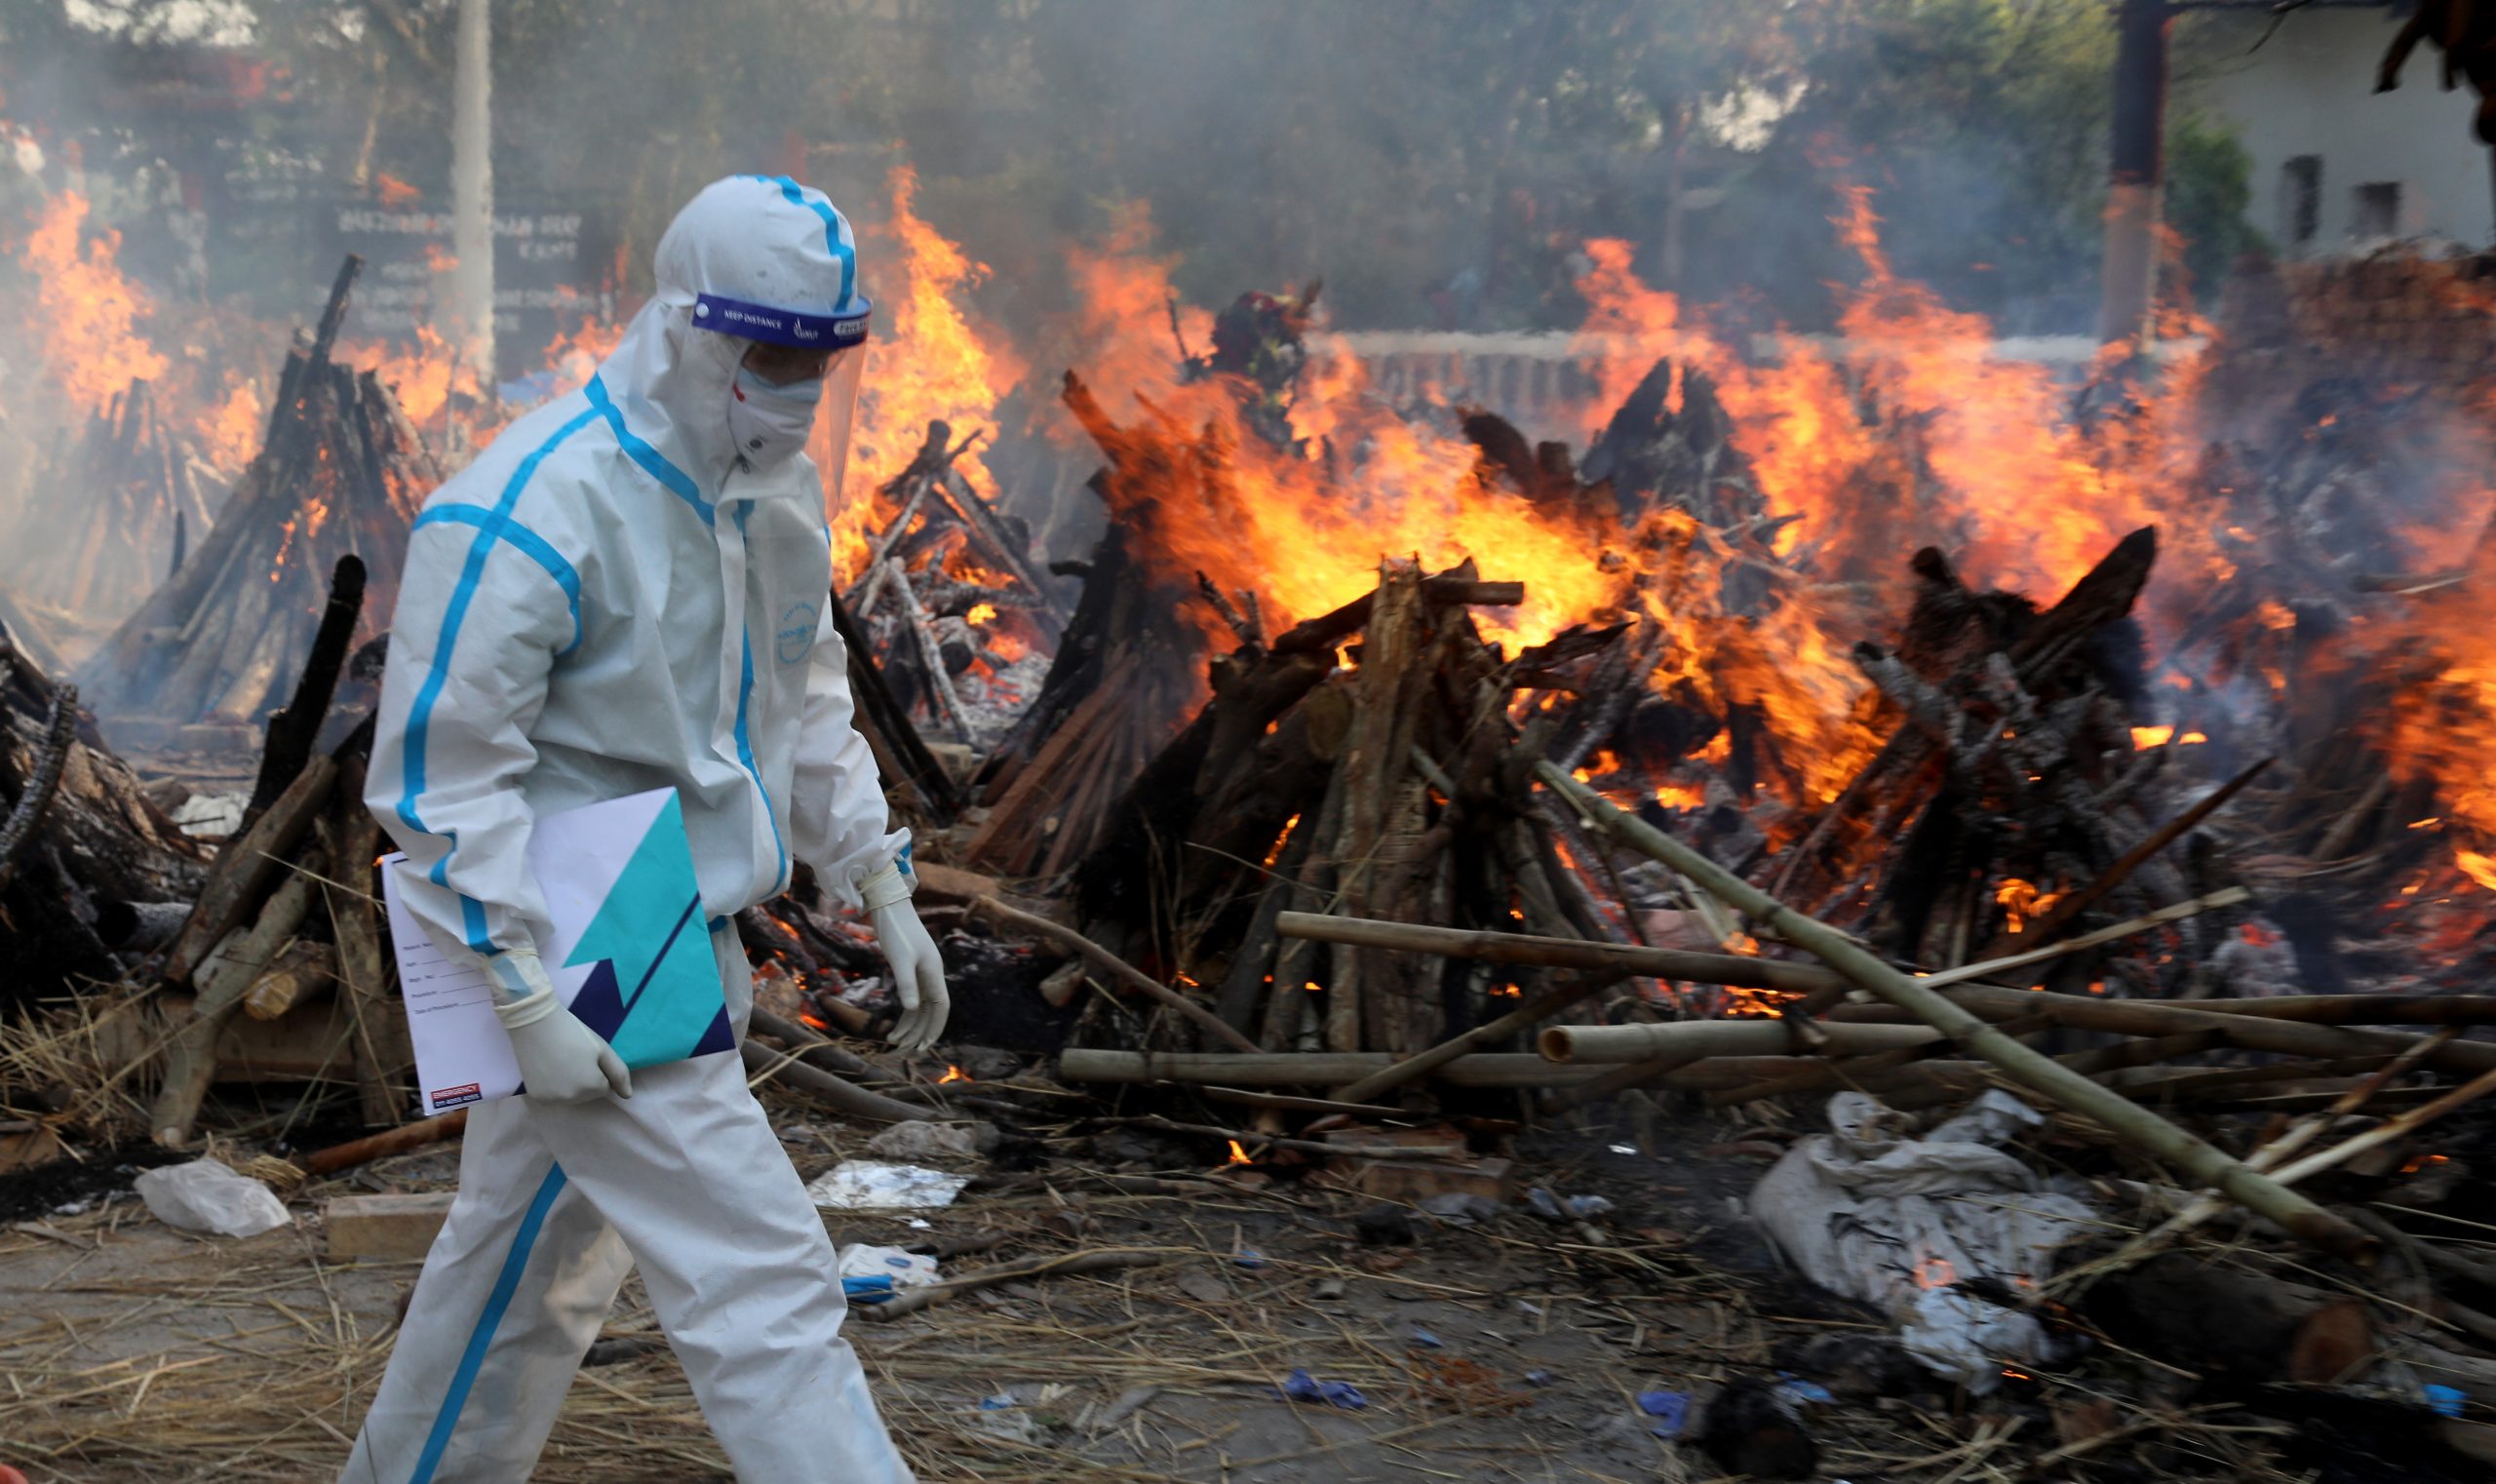 A man dressed in full PPE passing a mass cremation of Covid-19 victims in New Delhi, India, on April 30, 2021. Photo by Exposure Visuals/ Shutterstock.com.